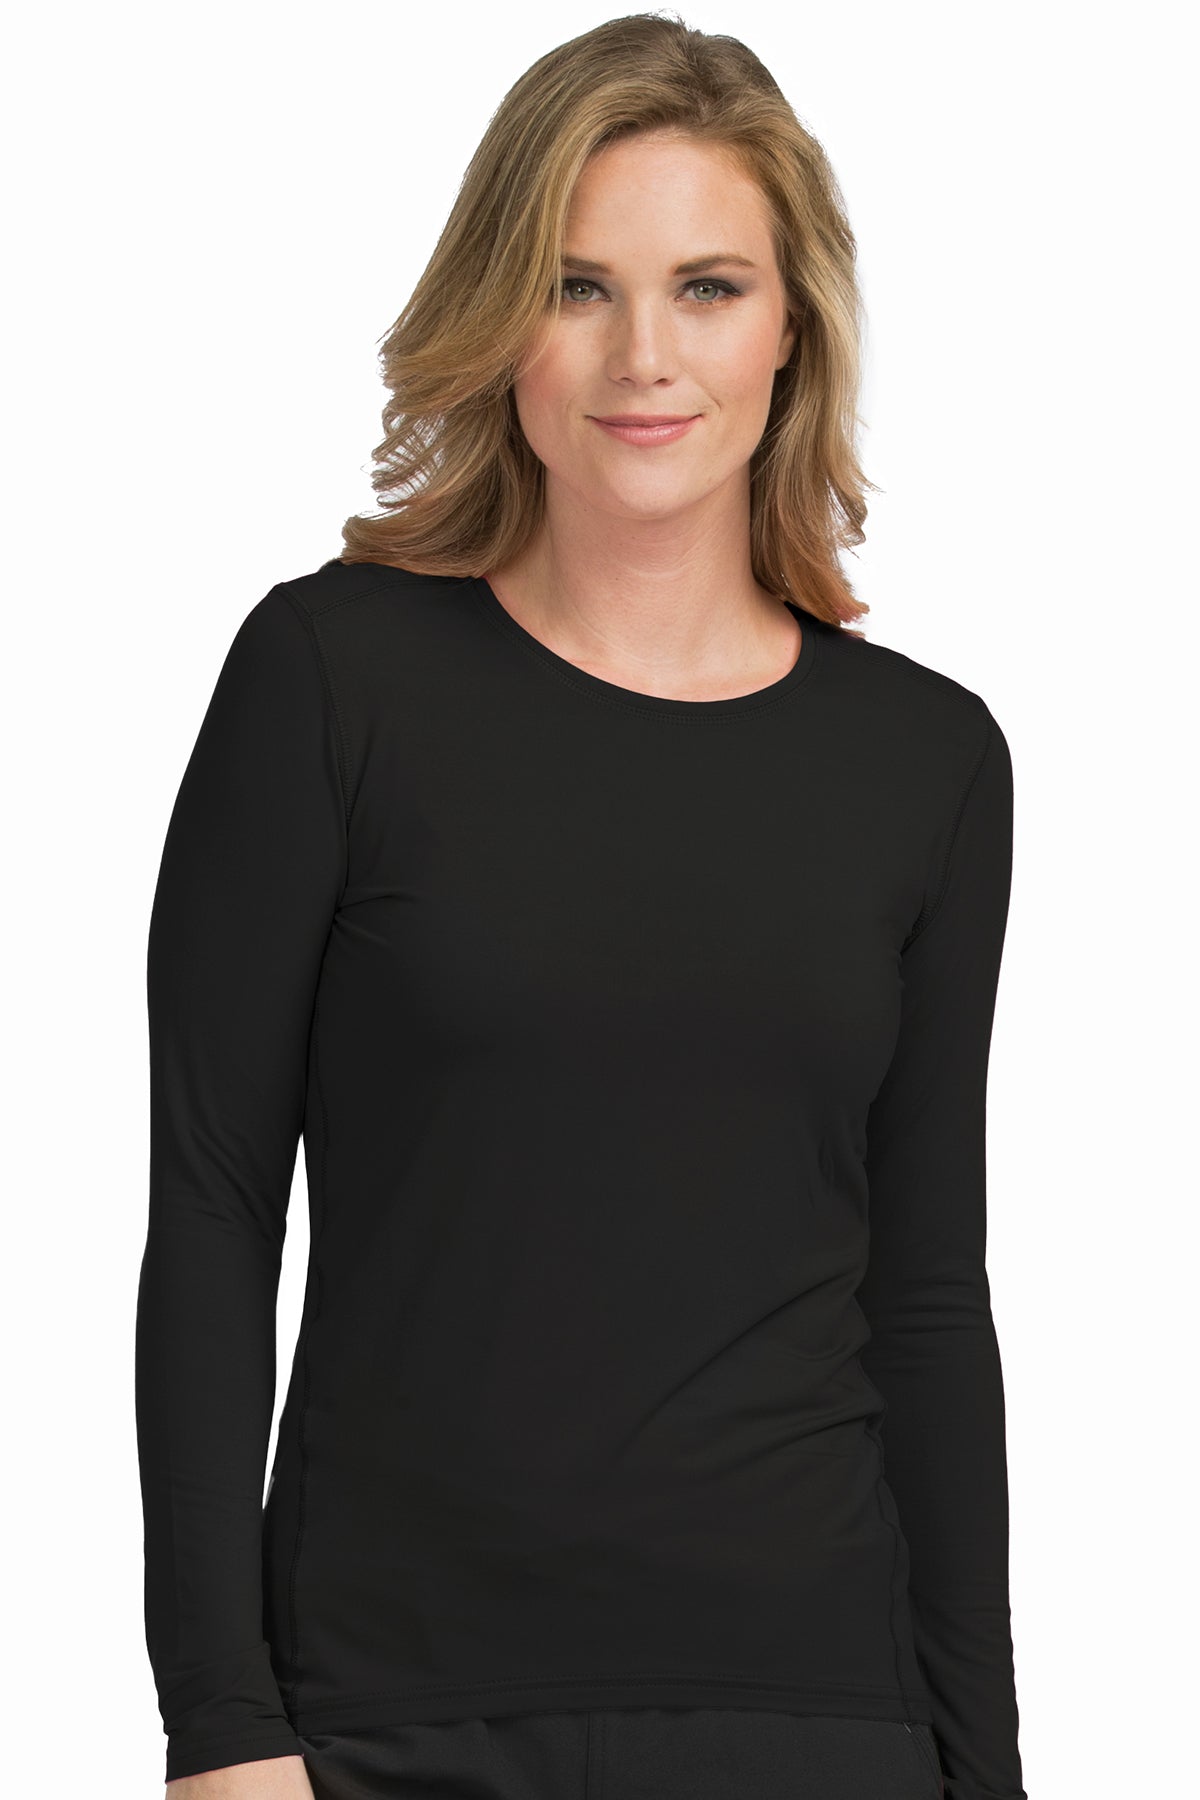 Med Couture Activate 8499 Performance Knit Tee